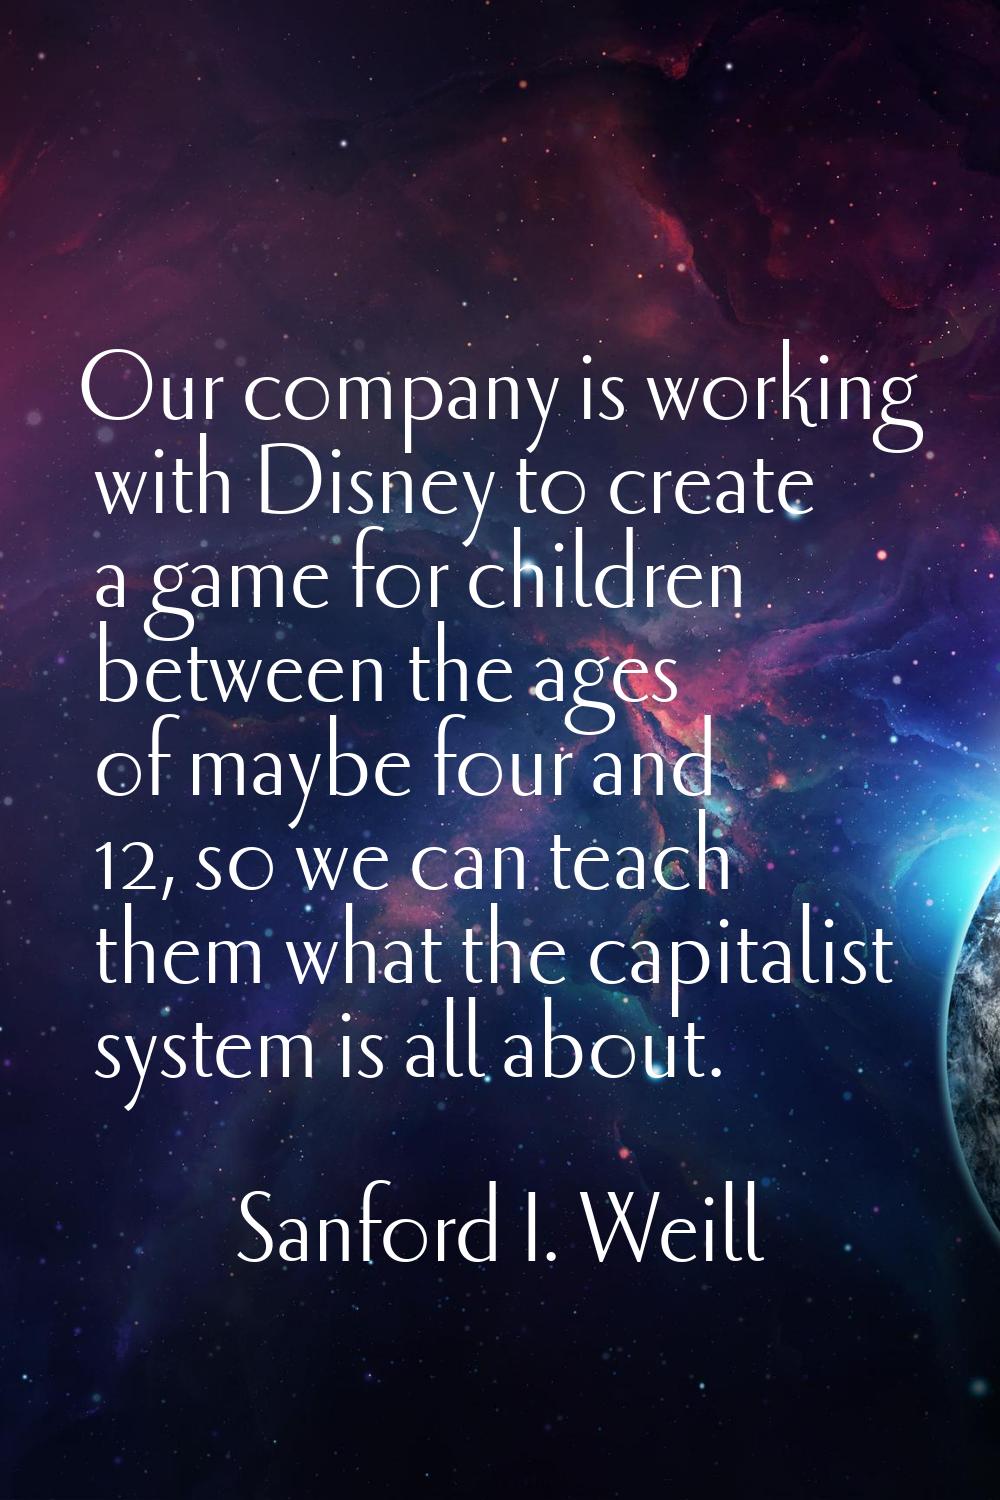 Our company is working with Disney to create a game for children between the ages of maybe four and